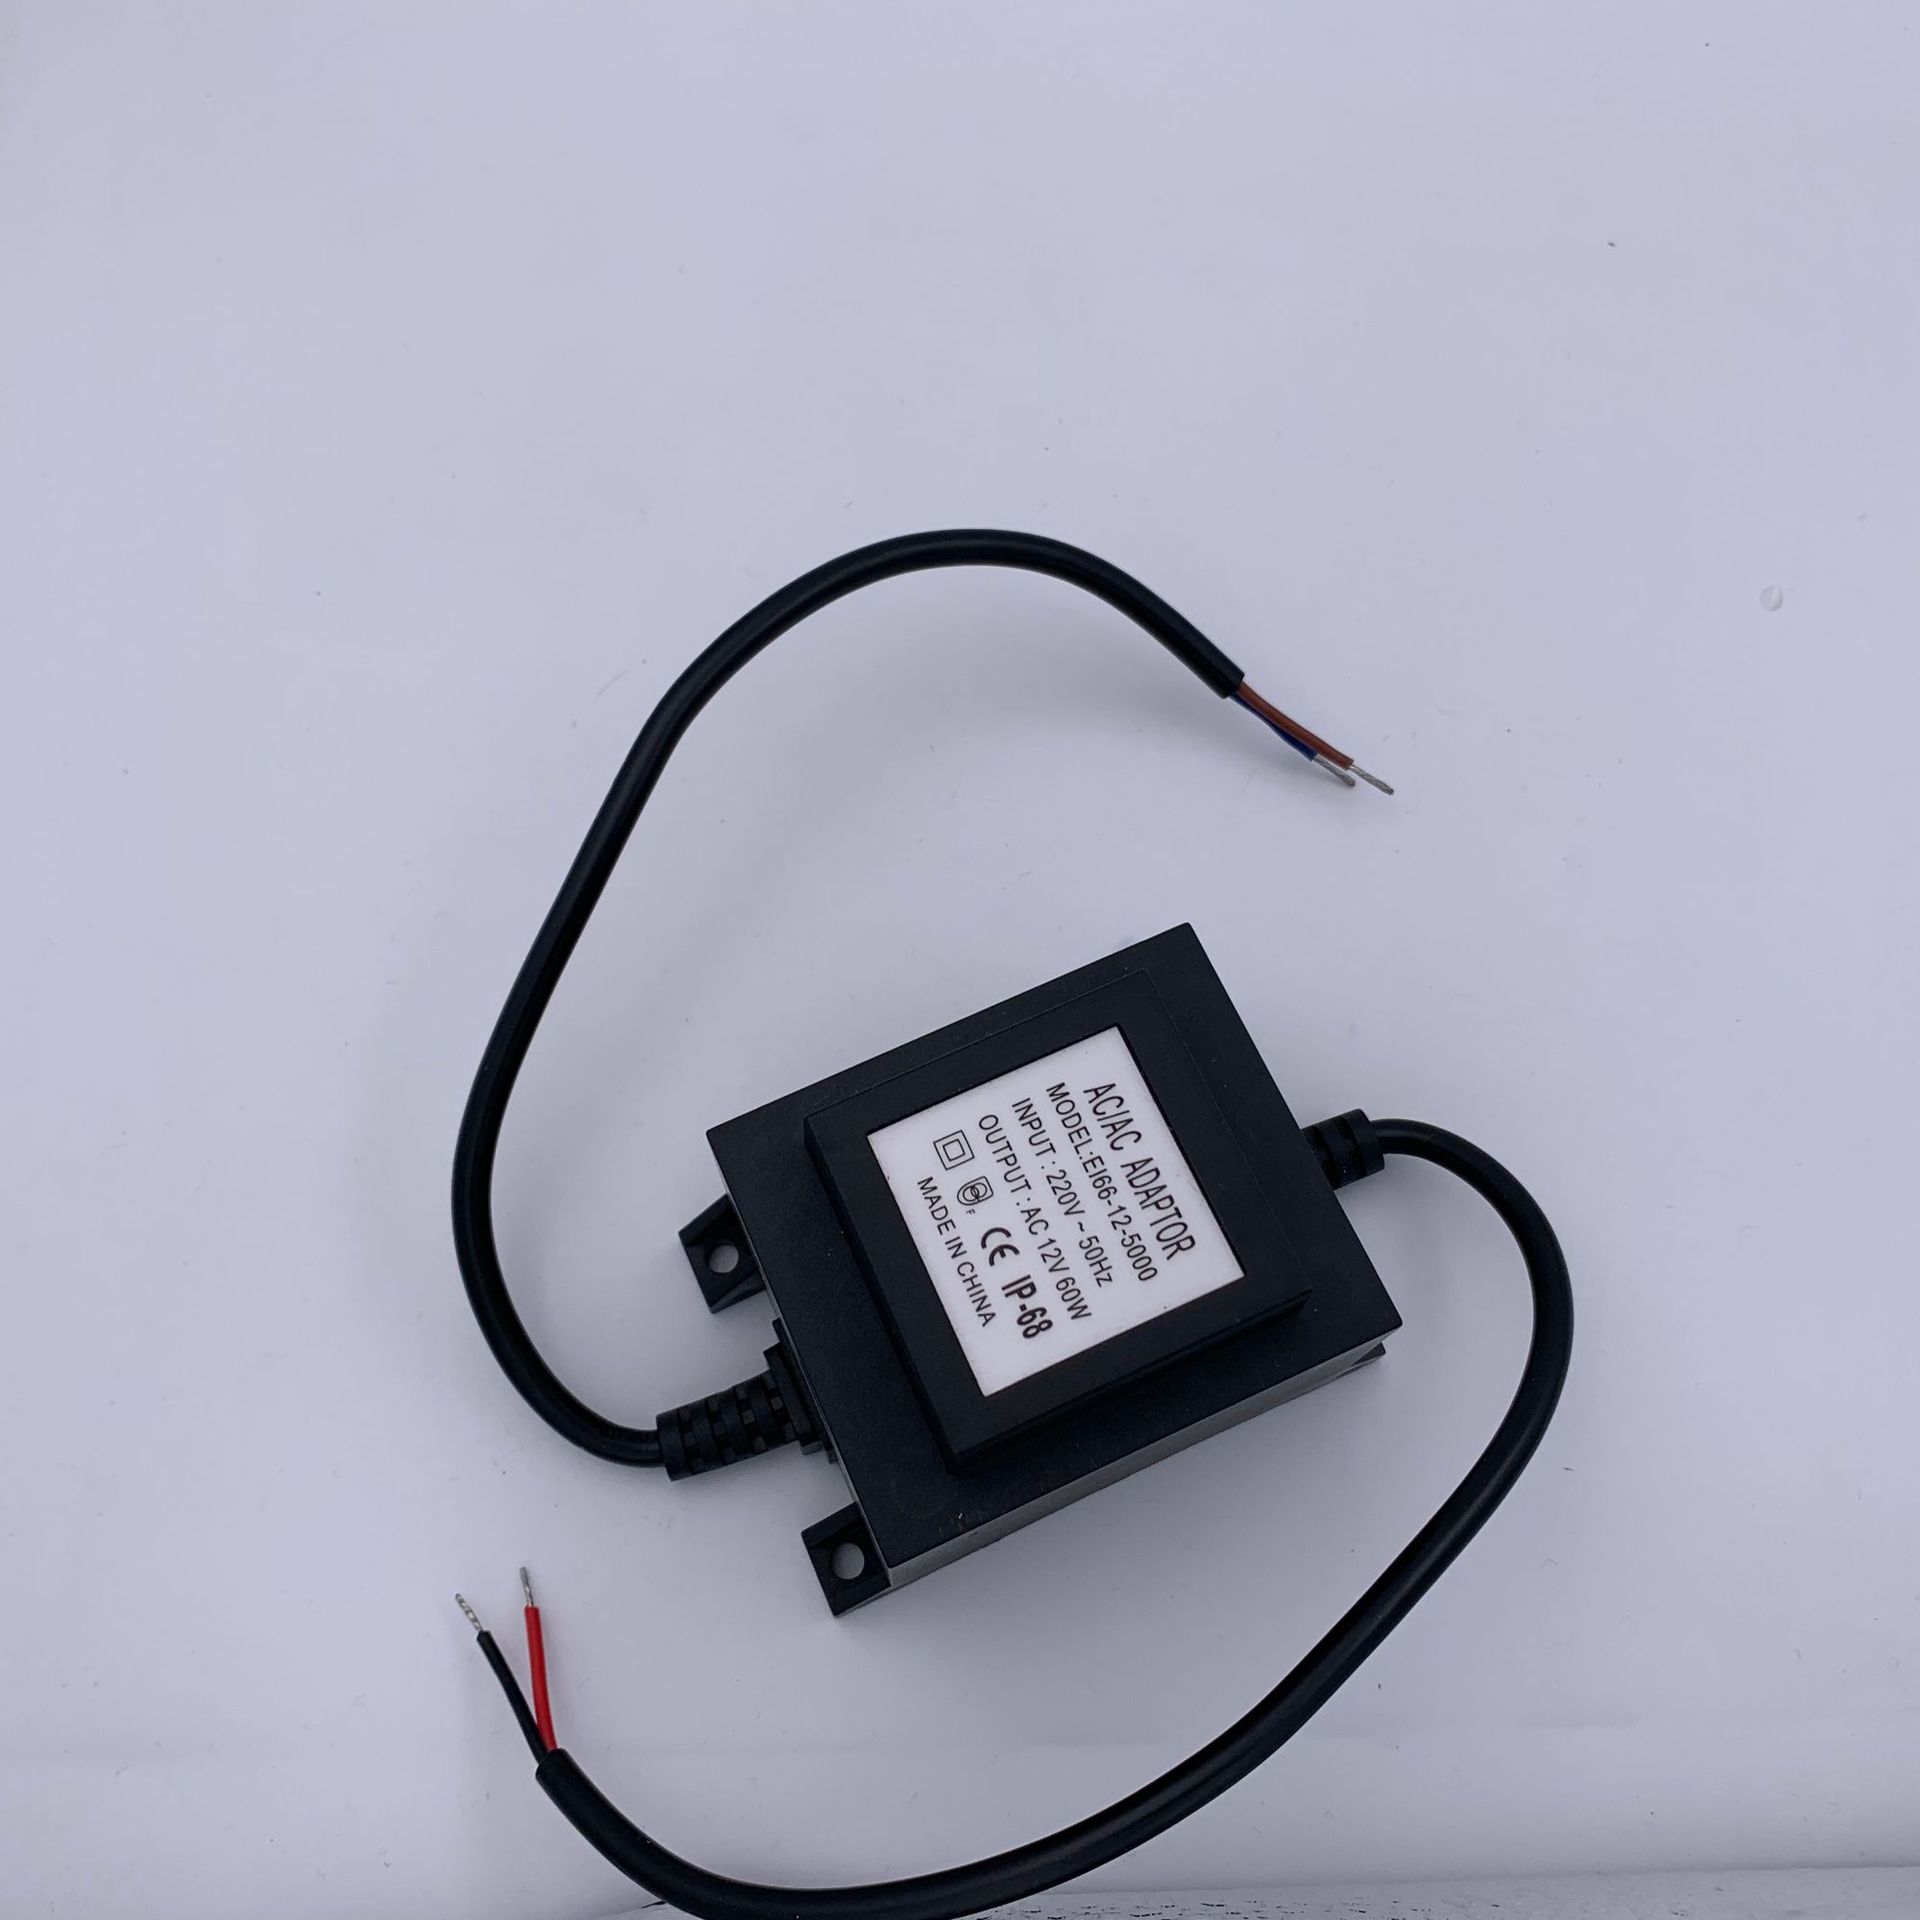 bo-chuyen-nguon-den-led-12v-30w-50w-80w-105w-150w-200w-260w-300w-chong-nuoc-ip68-tl-12v-pw03